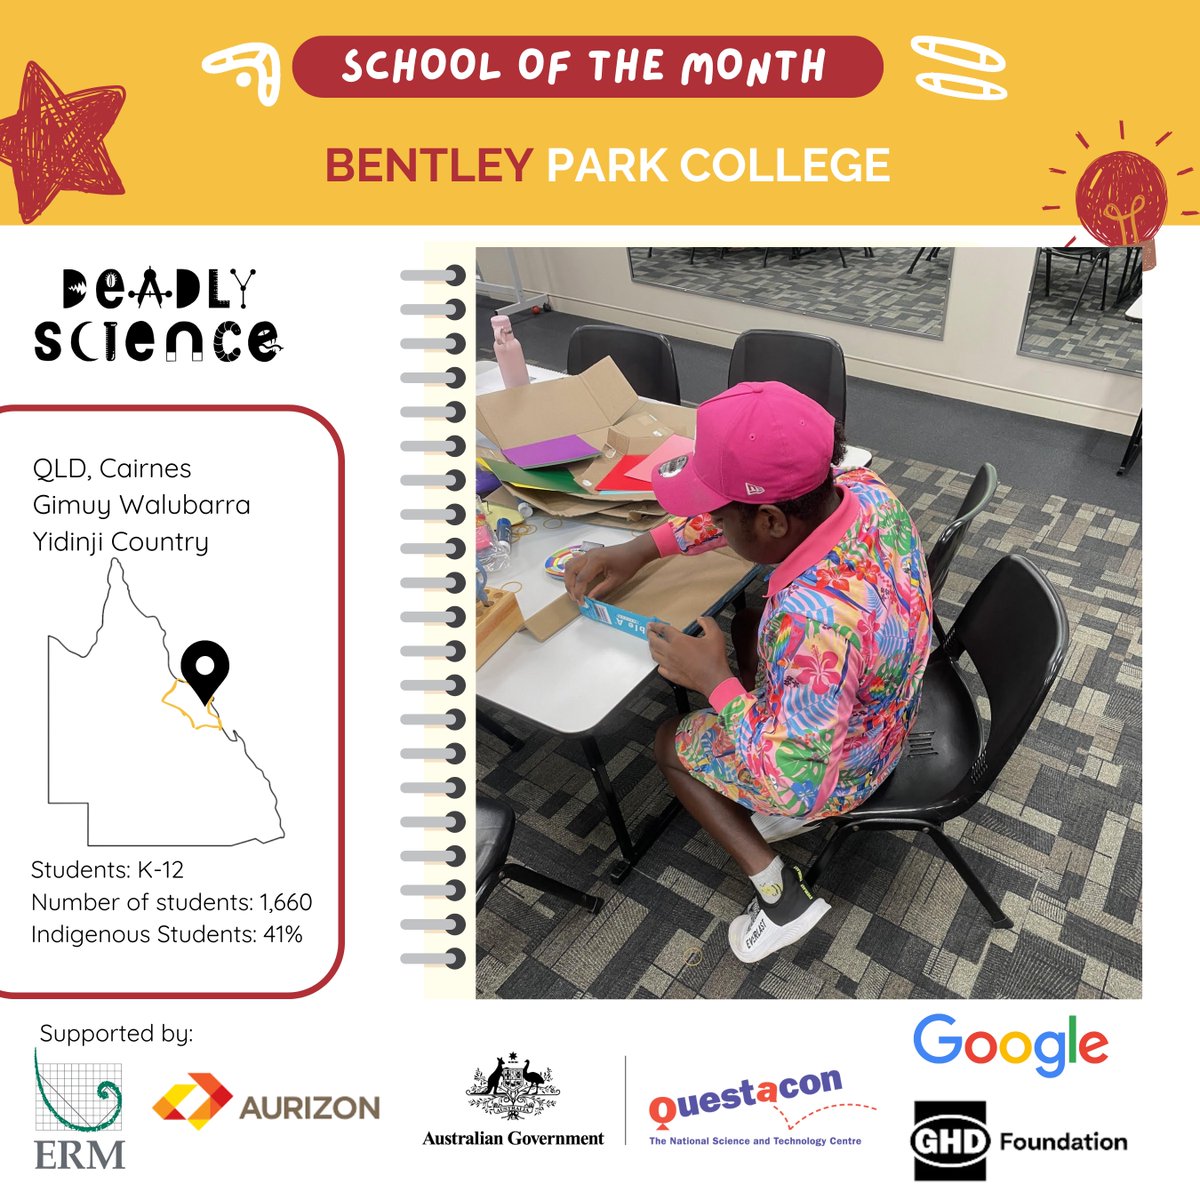 Celebrating our latest School of the Month - Bentley Park College! The School of the Month will receive a deadly gift pack thanks to @aurizon_, ERM, Google Australia, GHD Foundation and @questacon Do you want to be the next School of the Month? Email: admin@deadlyscience.org.au